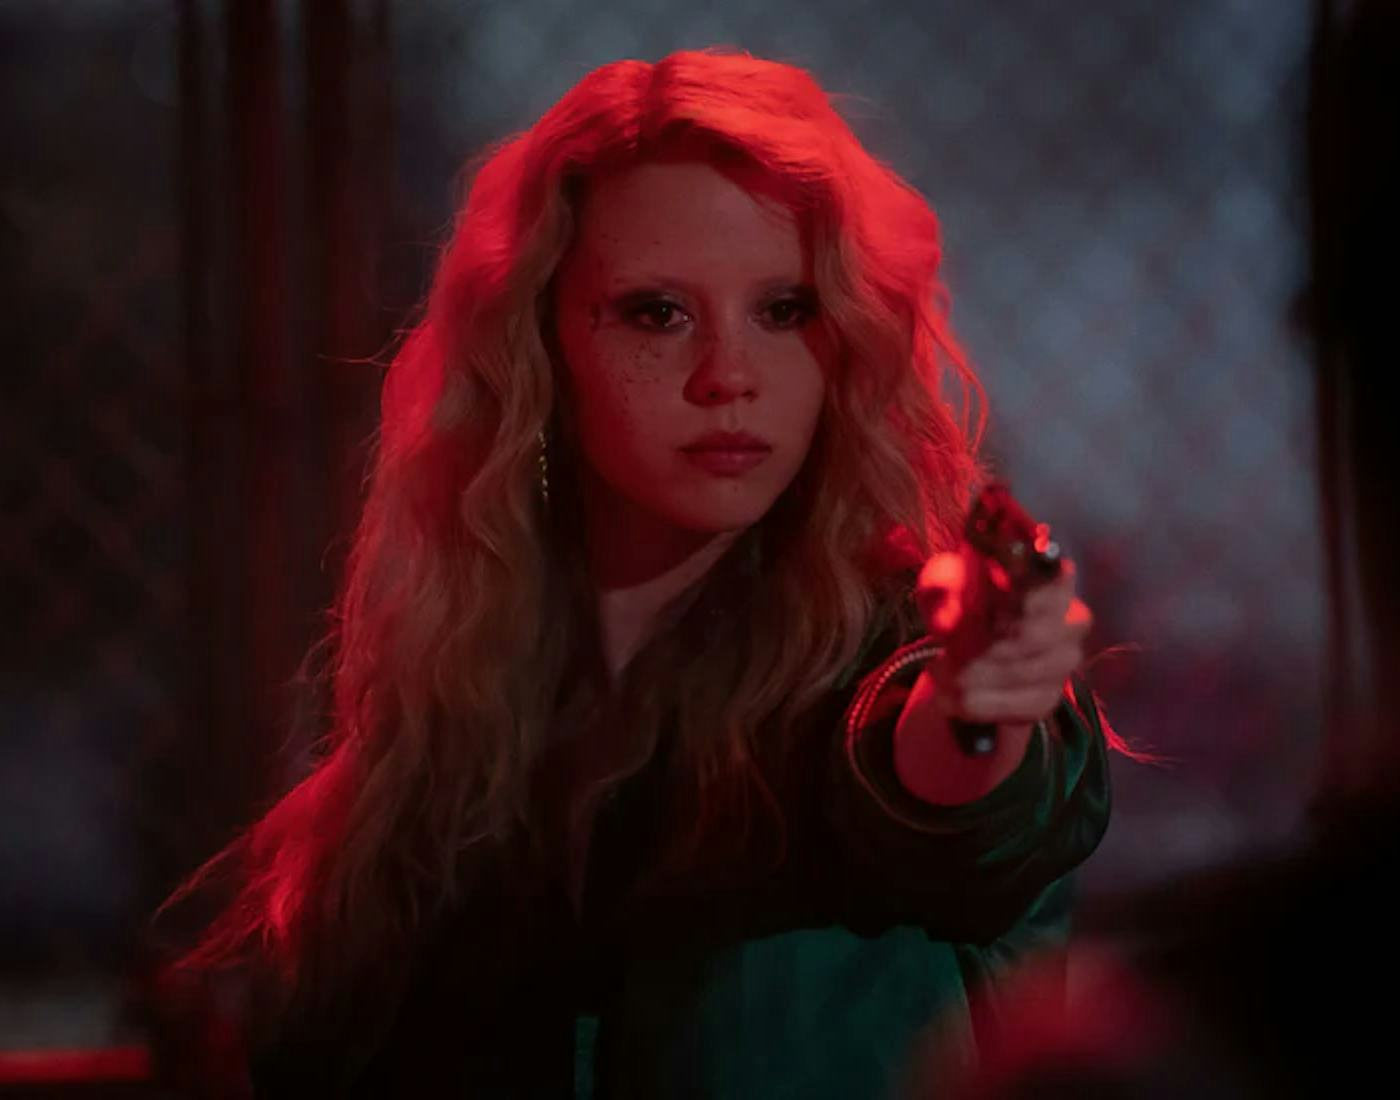 A woman with long blonde hair aiming a gun, intense expression, in a dimly lit, red-tinted room.